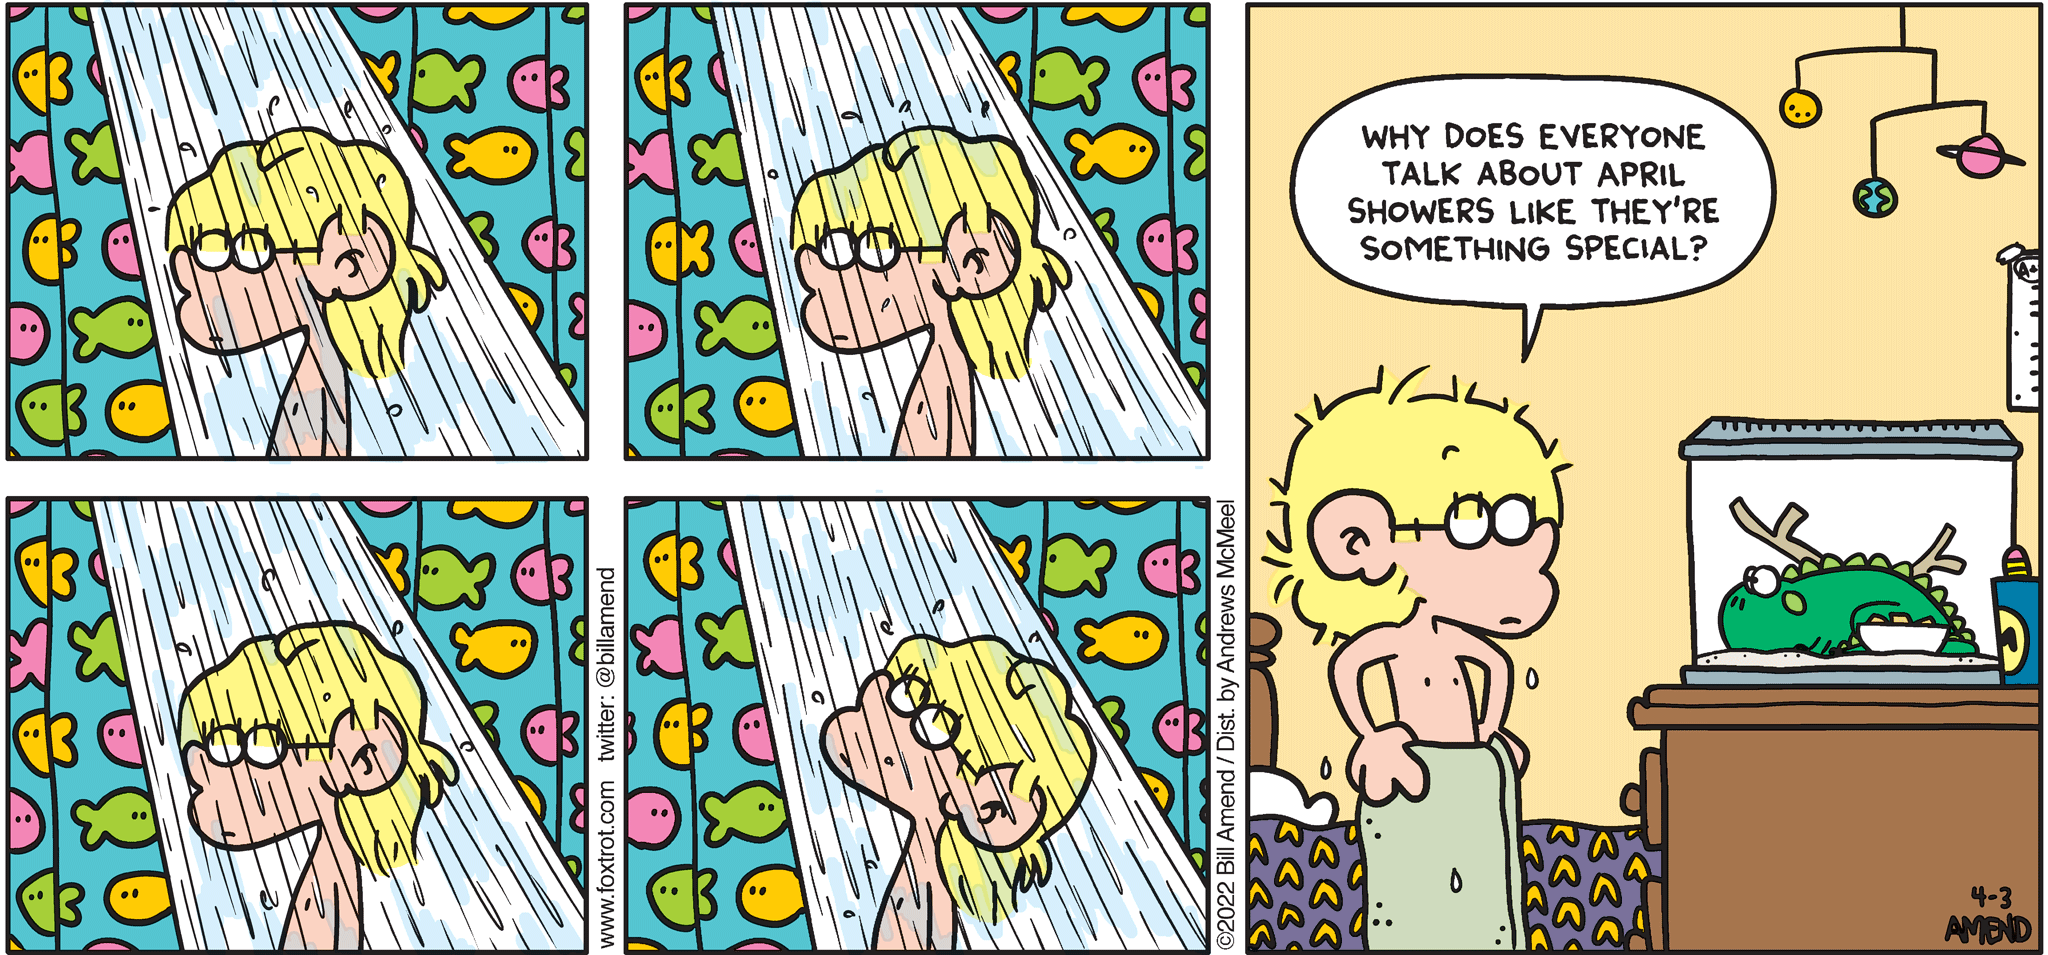 FoxTrot comic strip by Bill Amend - "Shower Season" published March 27, 2022 - Transcript: Jason Fox: Why does everyone talk about April showers like they're something special?